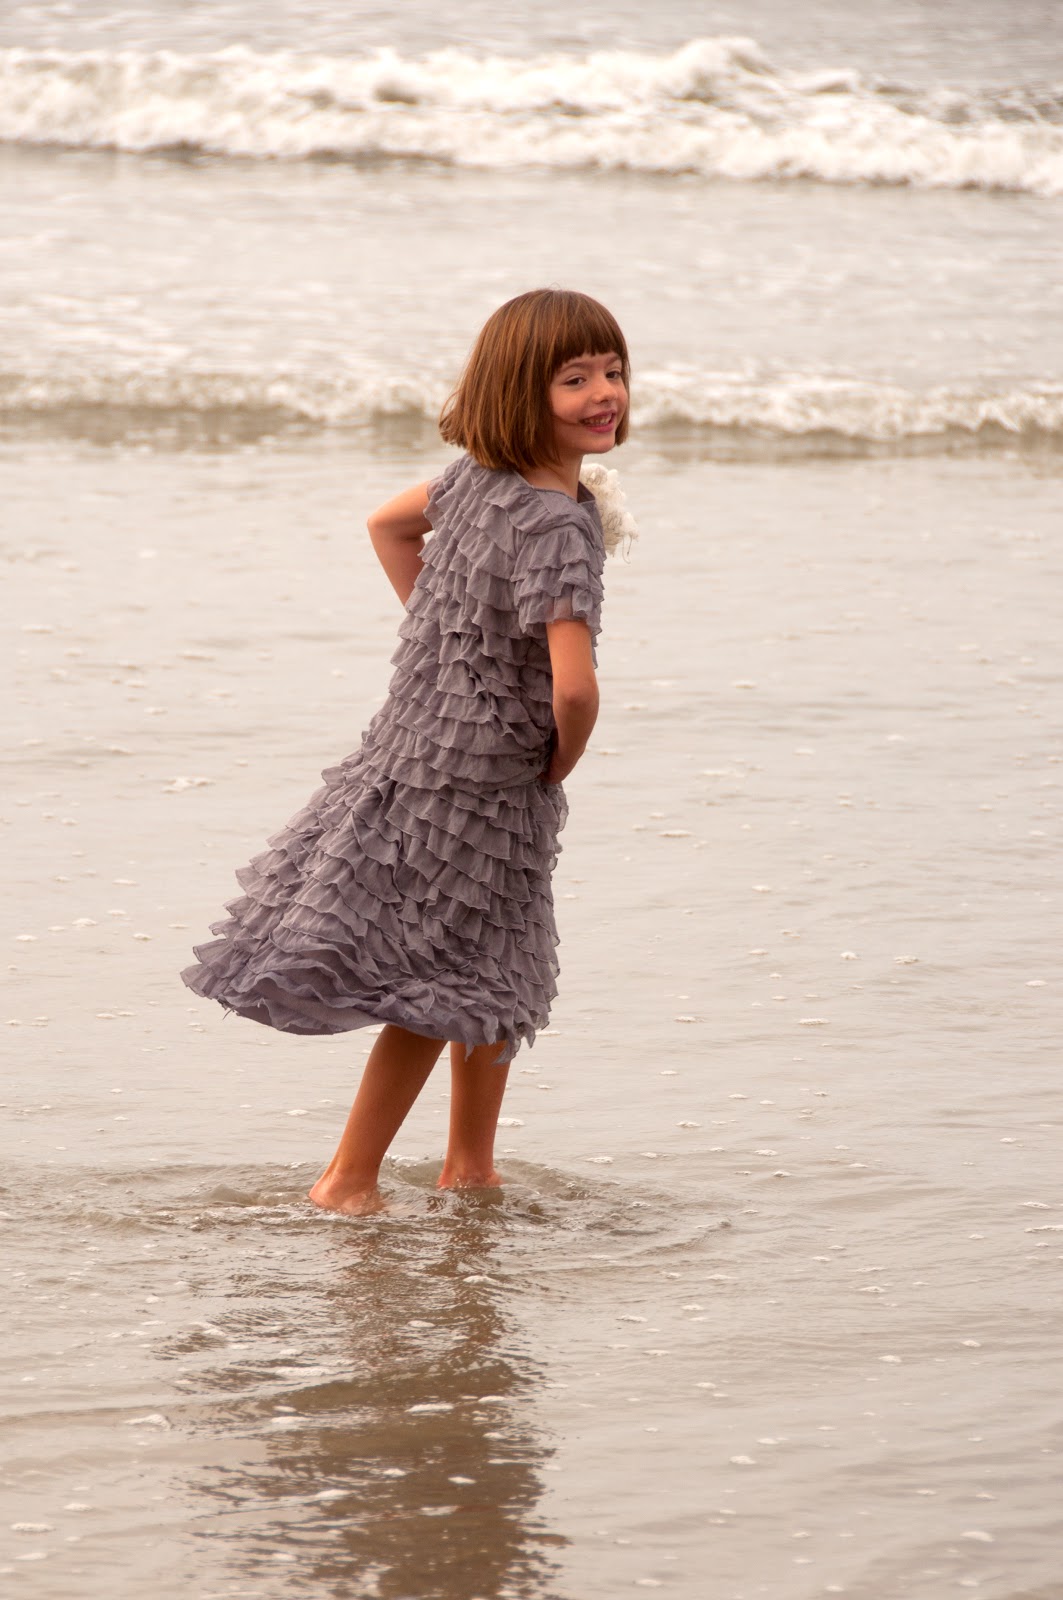 Aesthetic Nest: Sewing: Coastal Curtsy Dresses for the Beach